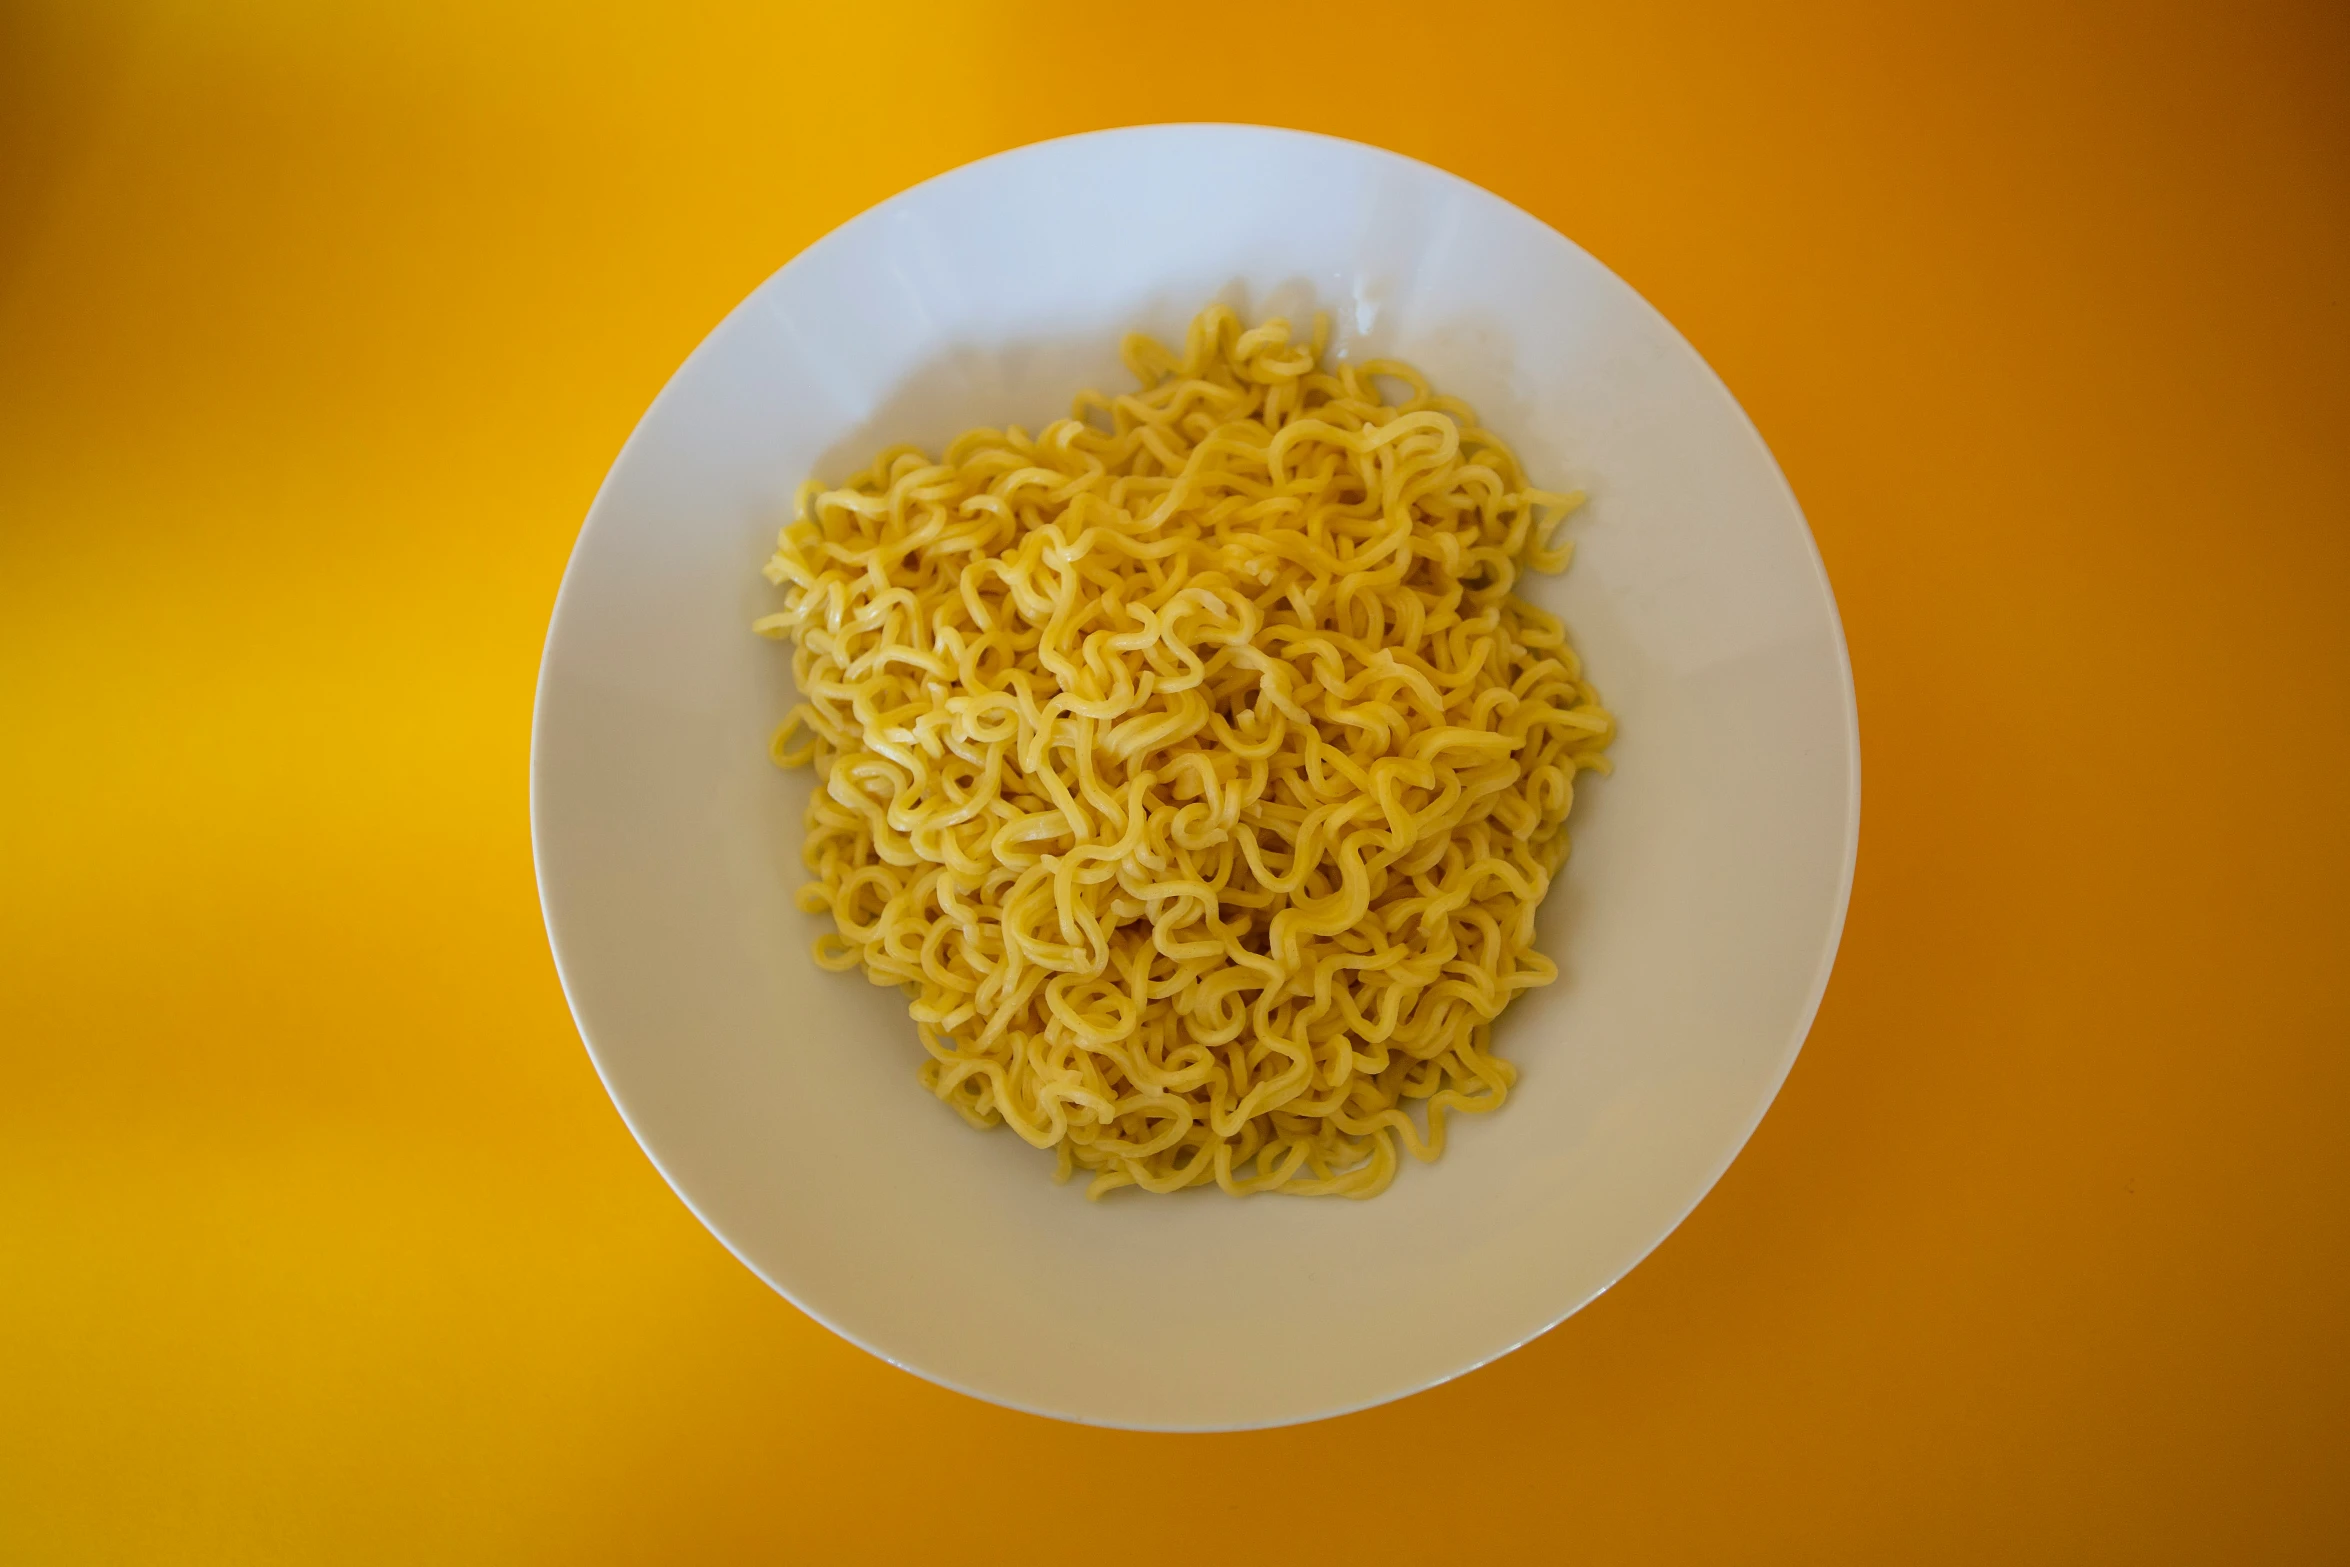 this is a closeup view of a plate of noodles